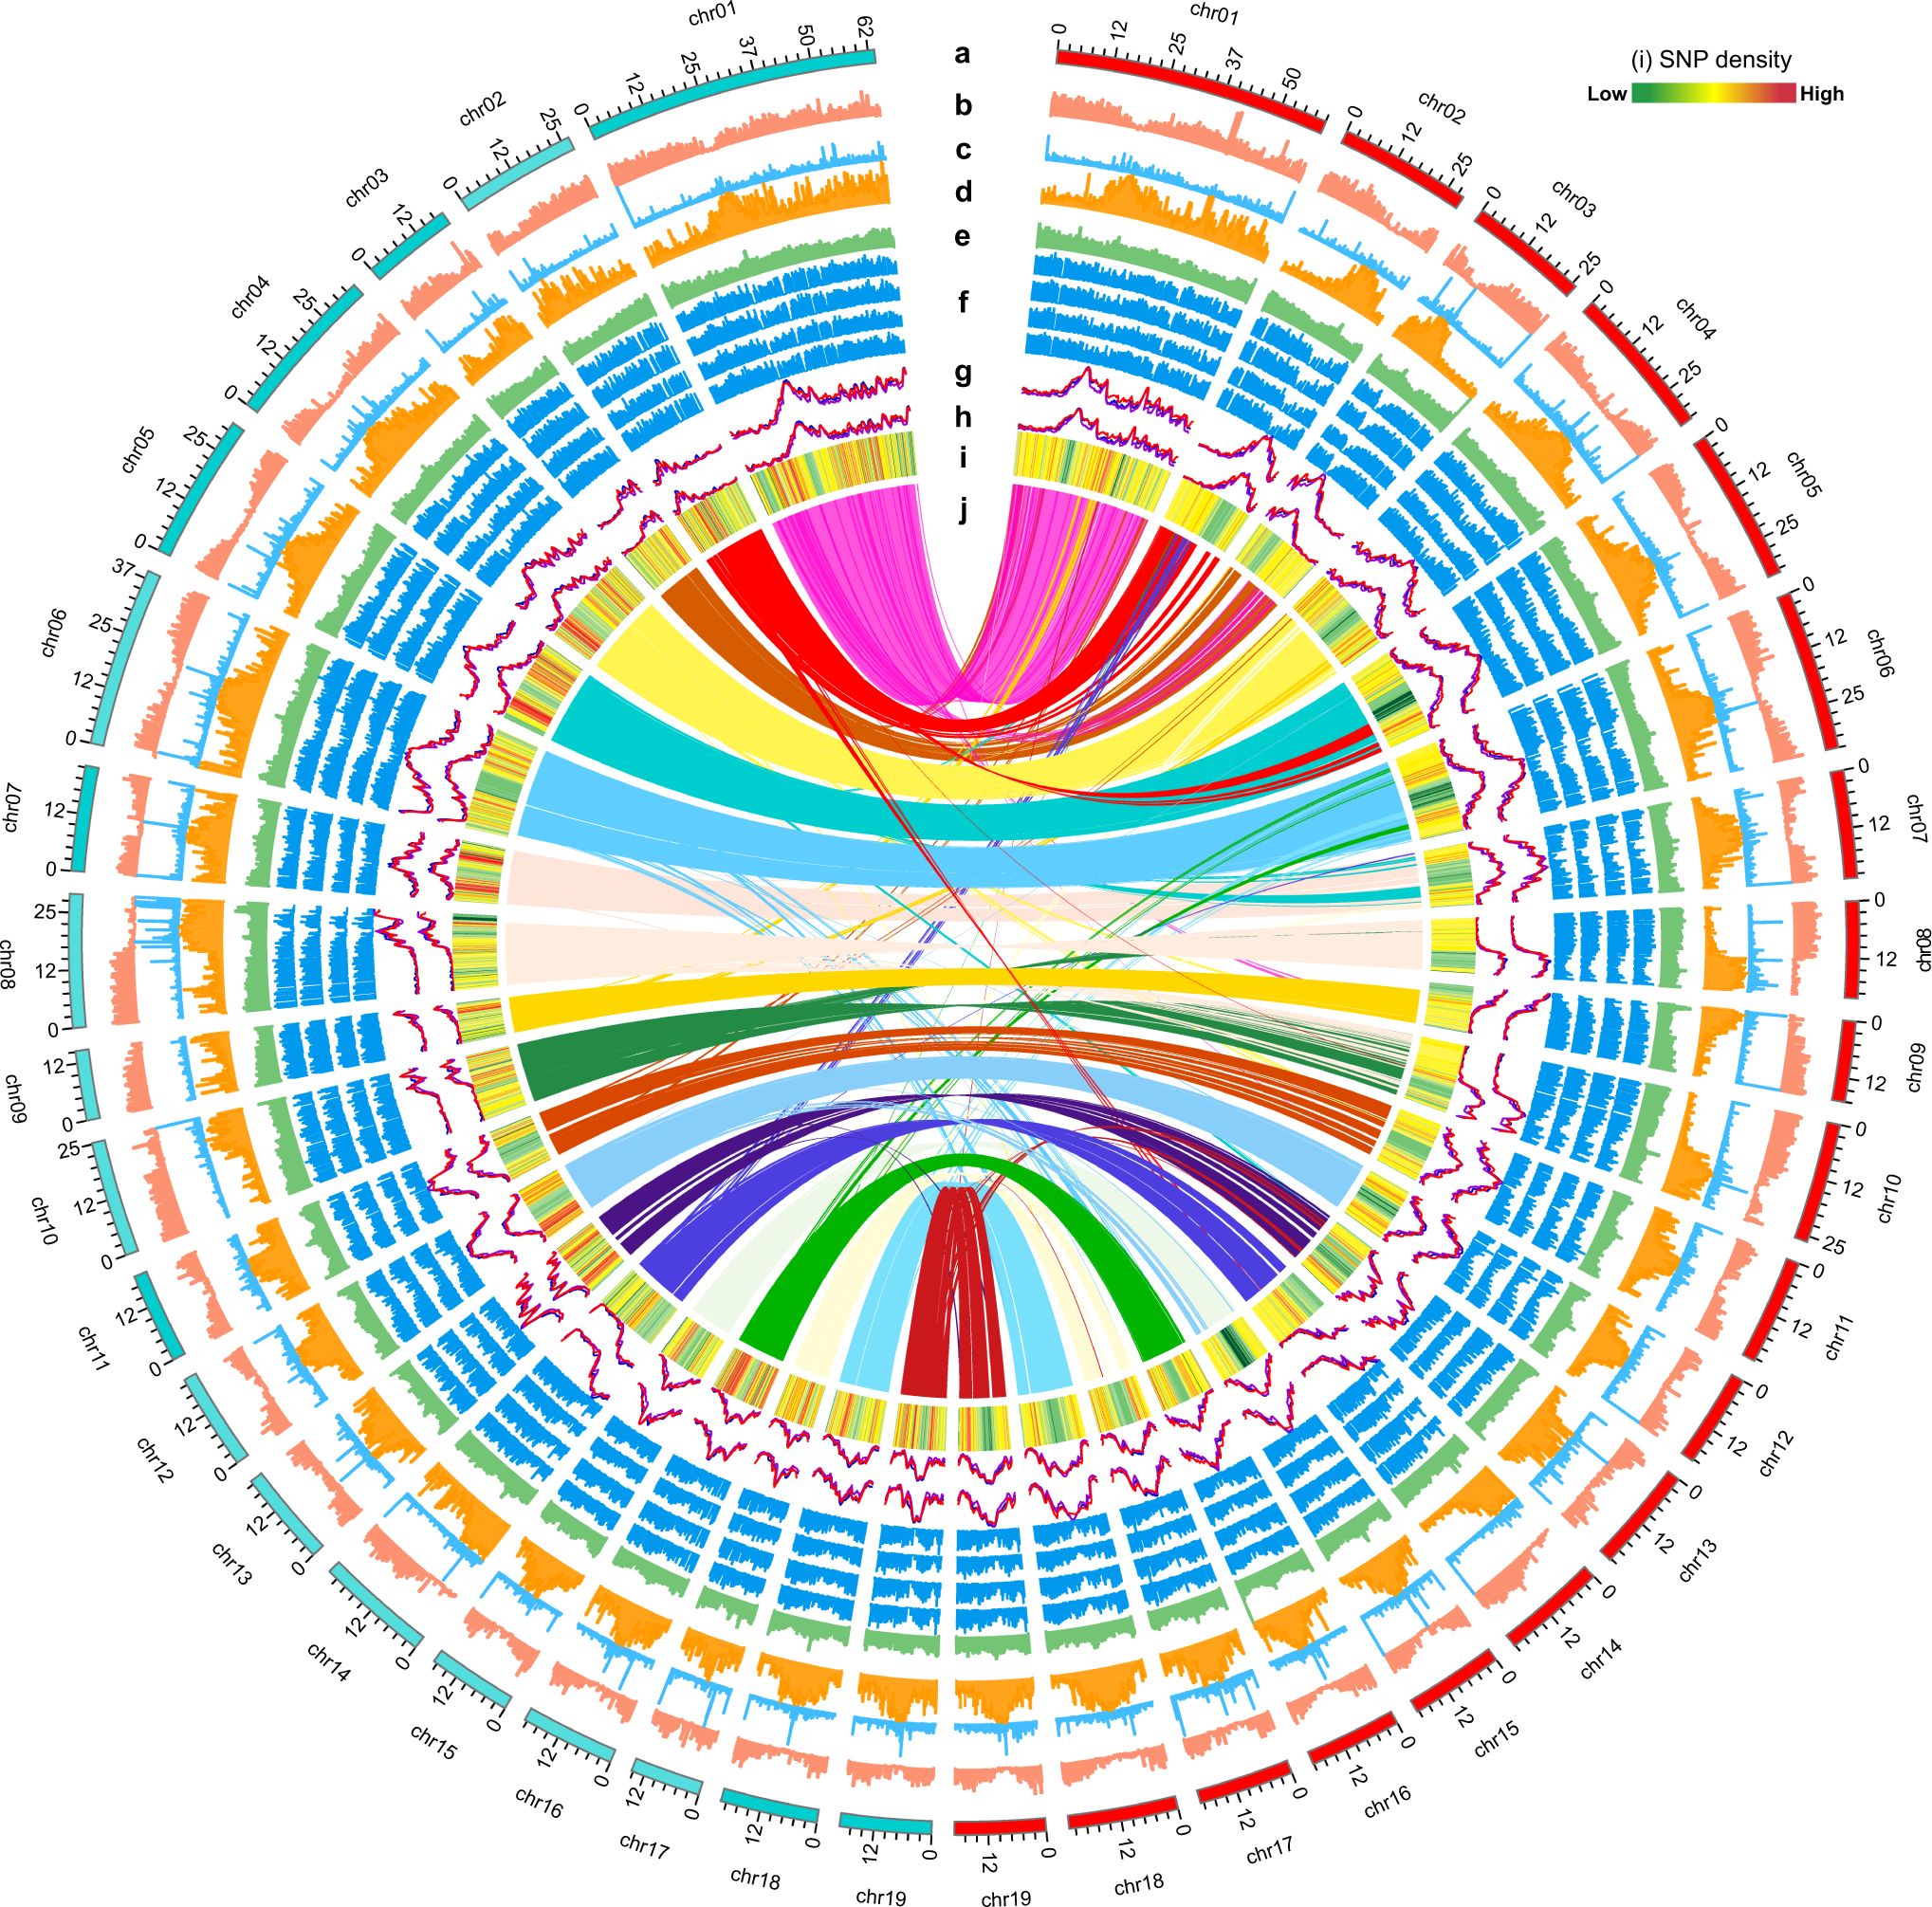 Chromosome-scale assemblies of the male and female Populus euphratica  genomes reveal the molecular basis of sex determination and sexual  dimorphism | Communications Biology